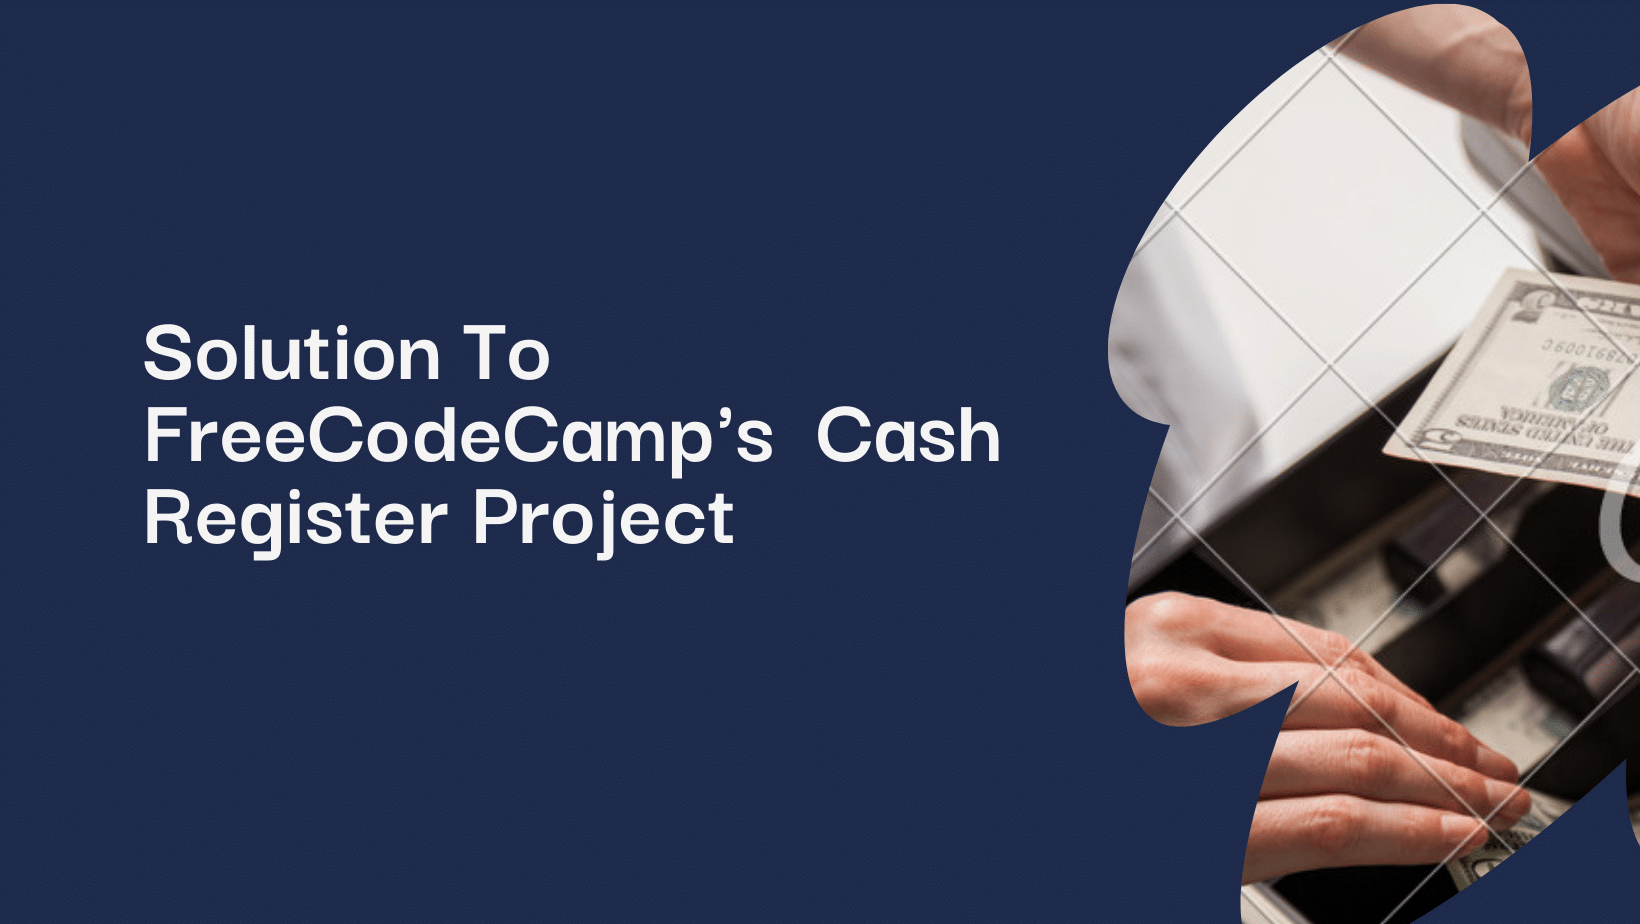 Solution to FreecodeCamp’s Cash Register Project